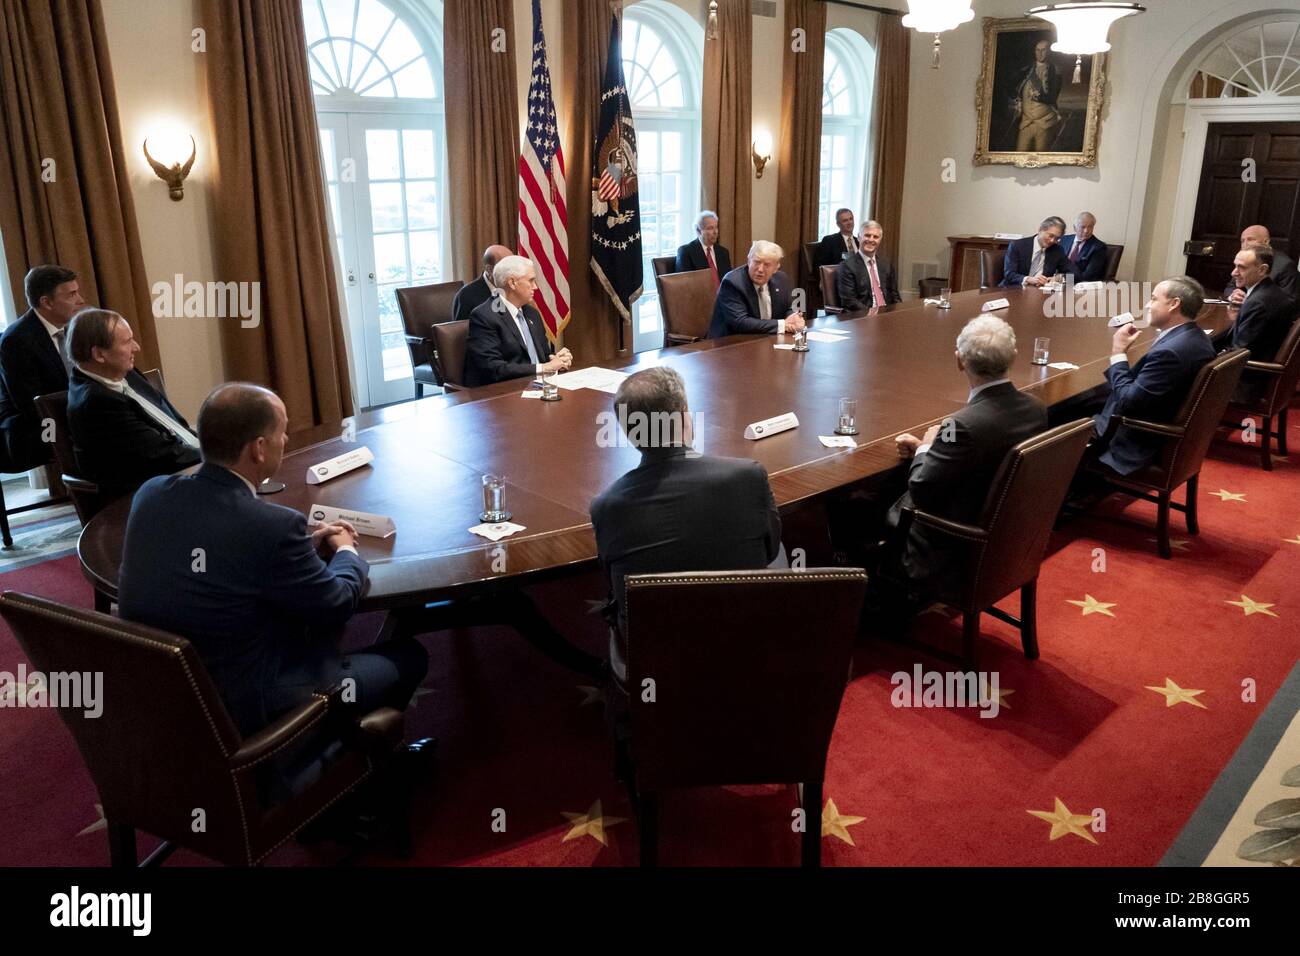 Washington, United States Of America. 17th Mar, 2020. President Donald J. Trump, joined by Vice President Mike Pence, meets with tourism industry executives to discuss the healthcare and economic responses to the coronavirus outbreak Tuesday, March 17, 2020, in the Cabinet Room of the White House. People: President Donald Trump Credit: Storms Media Group/Alamy Live News Stock Photo